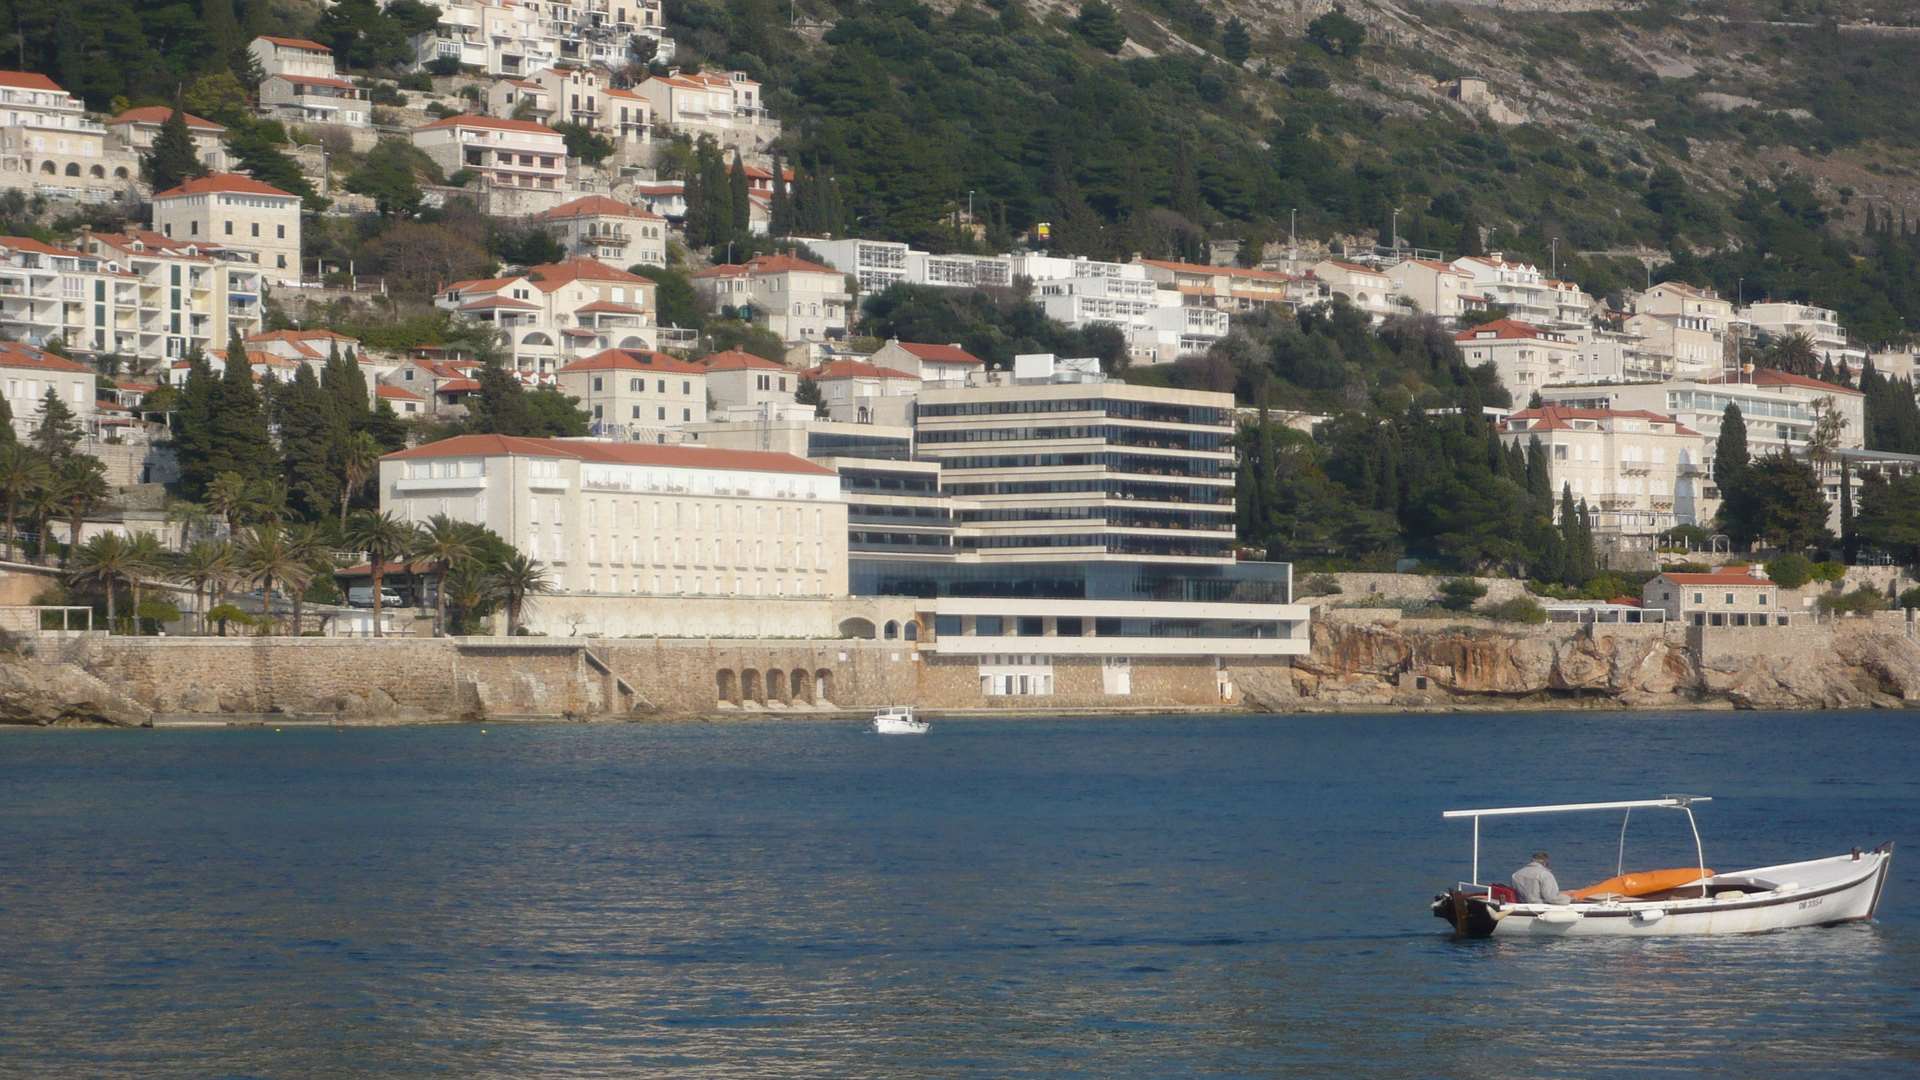 The Hotel Excelsior, one of Dubrovnik's oldest and most luxurious hotels